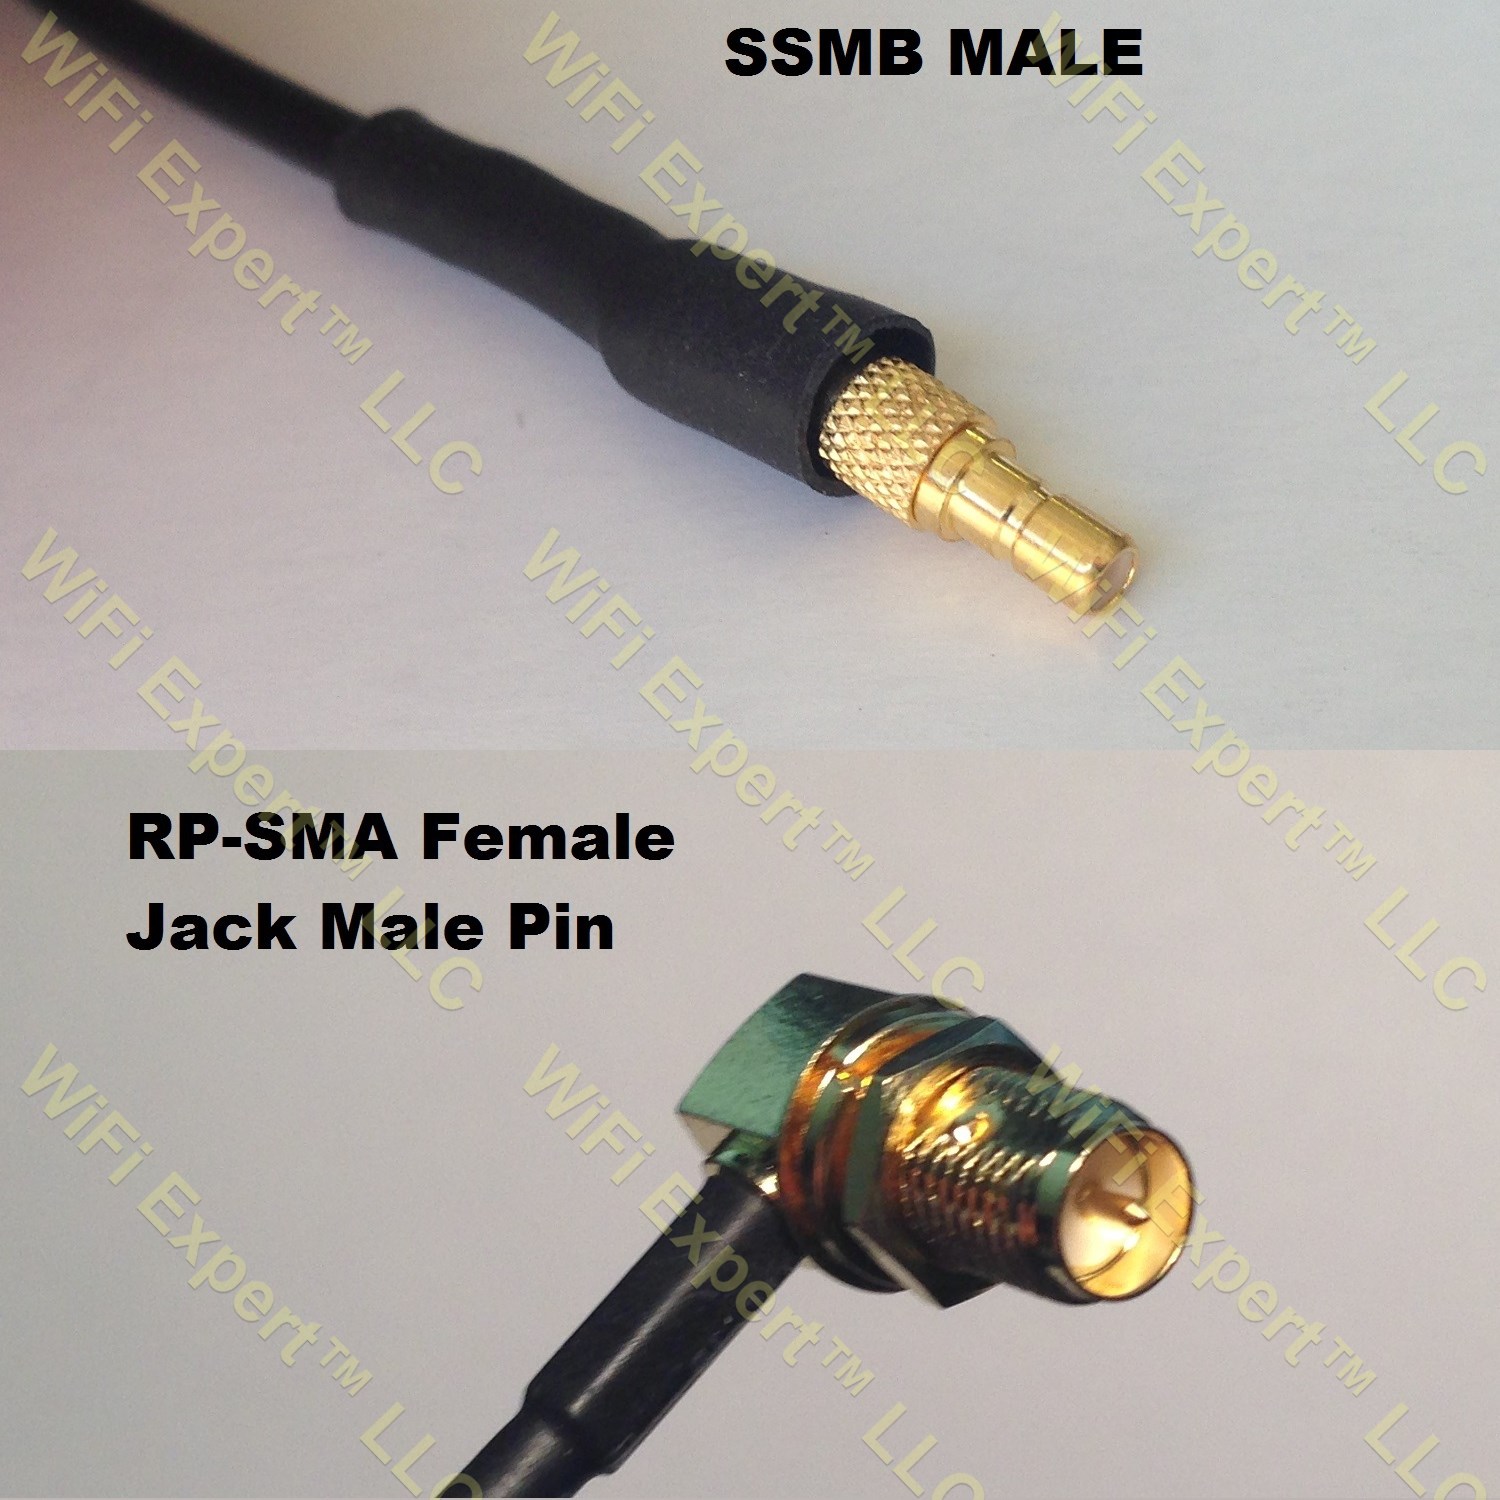 This is for two never used Sucoform 9.5 inch cable with 2 male SMA connectors. 